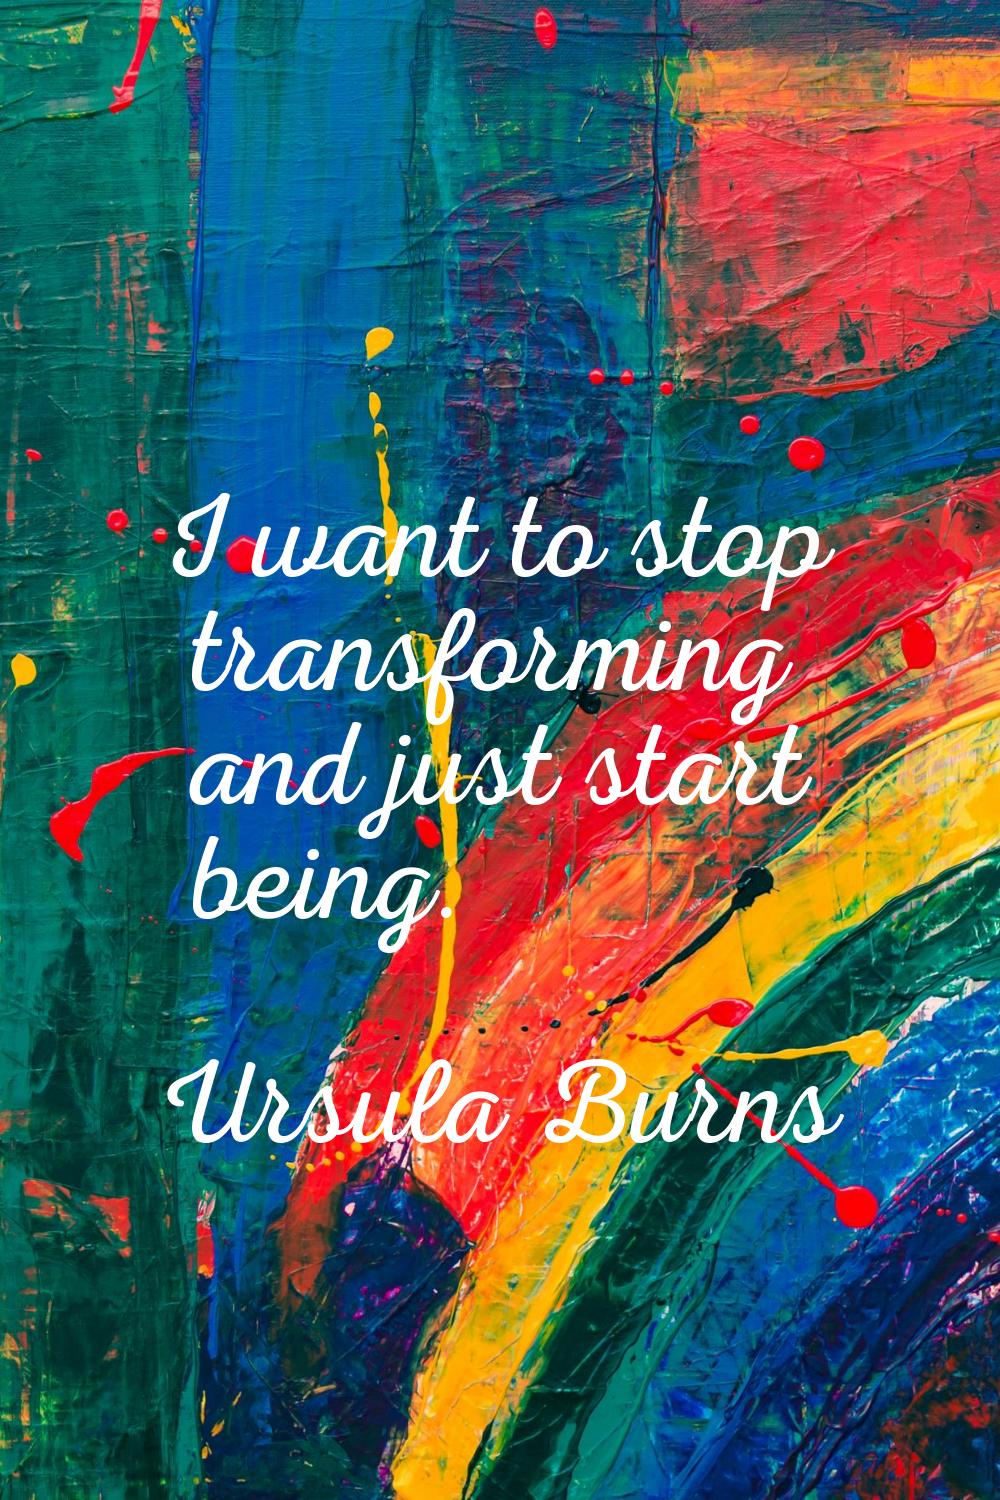 I want to stop transforming and just start being.